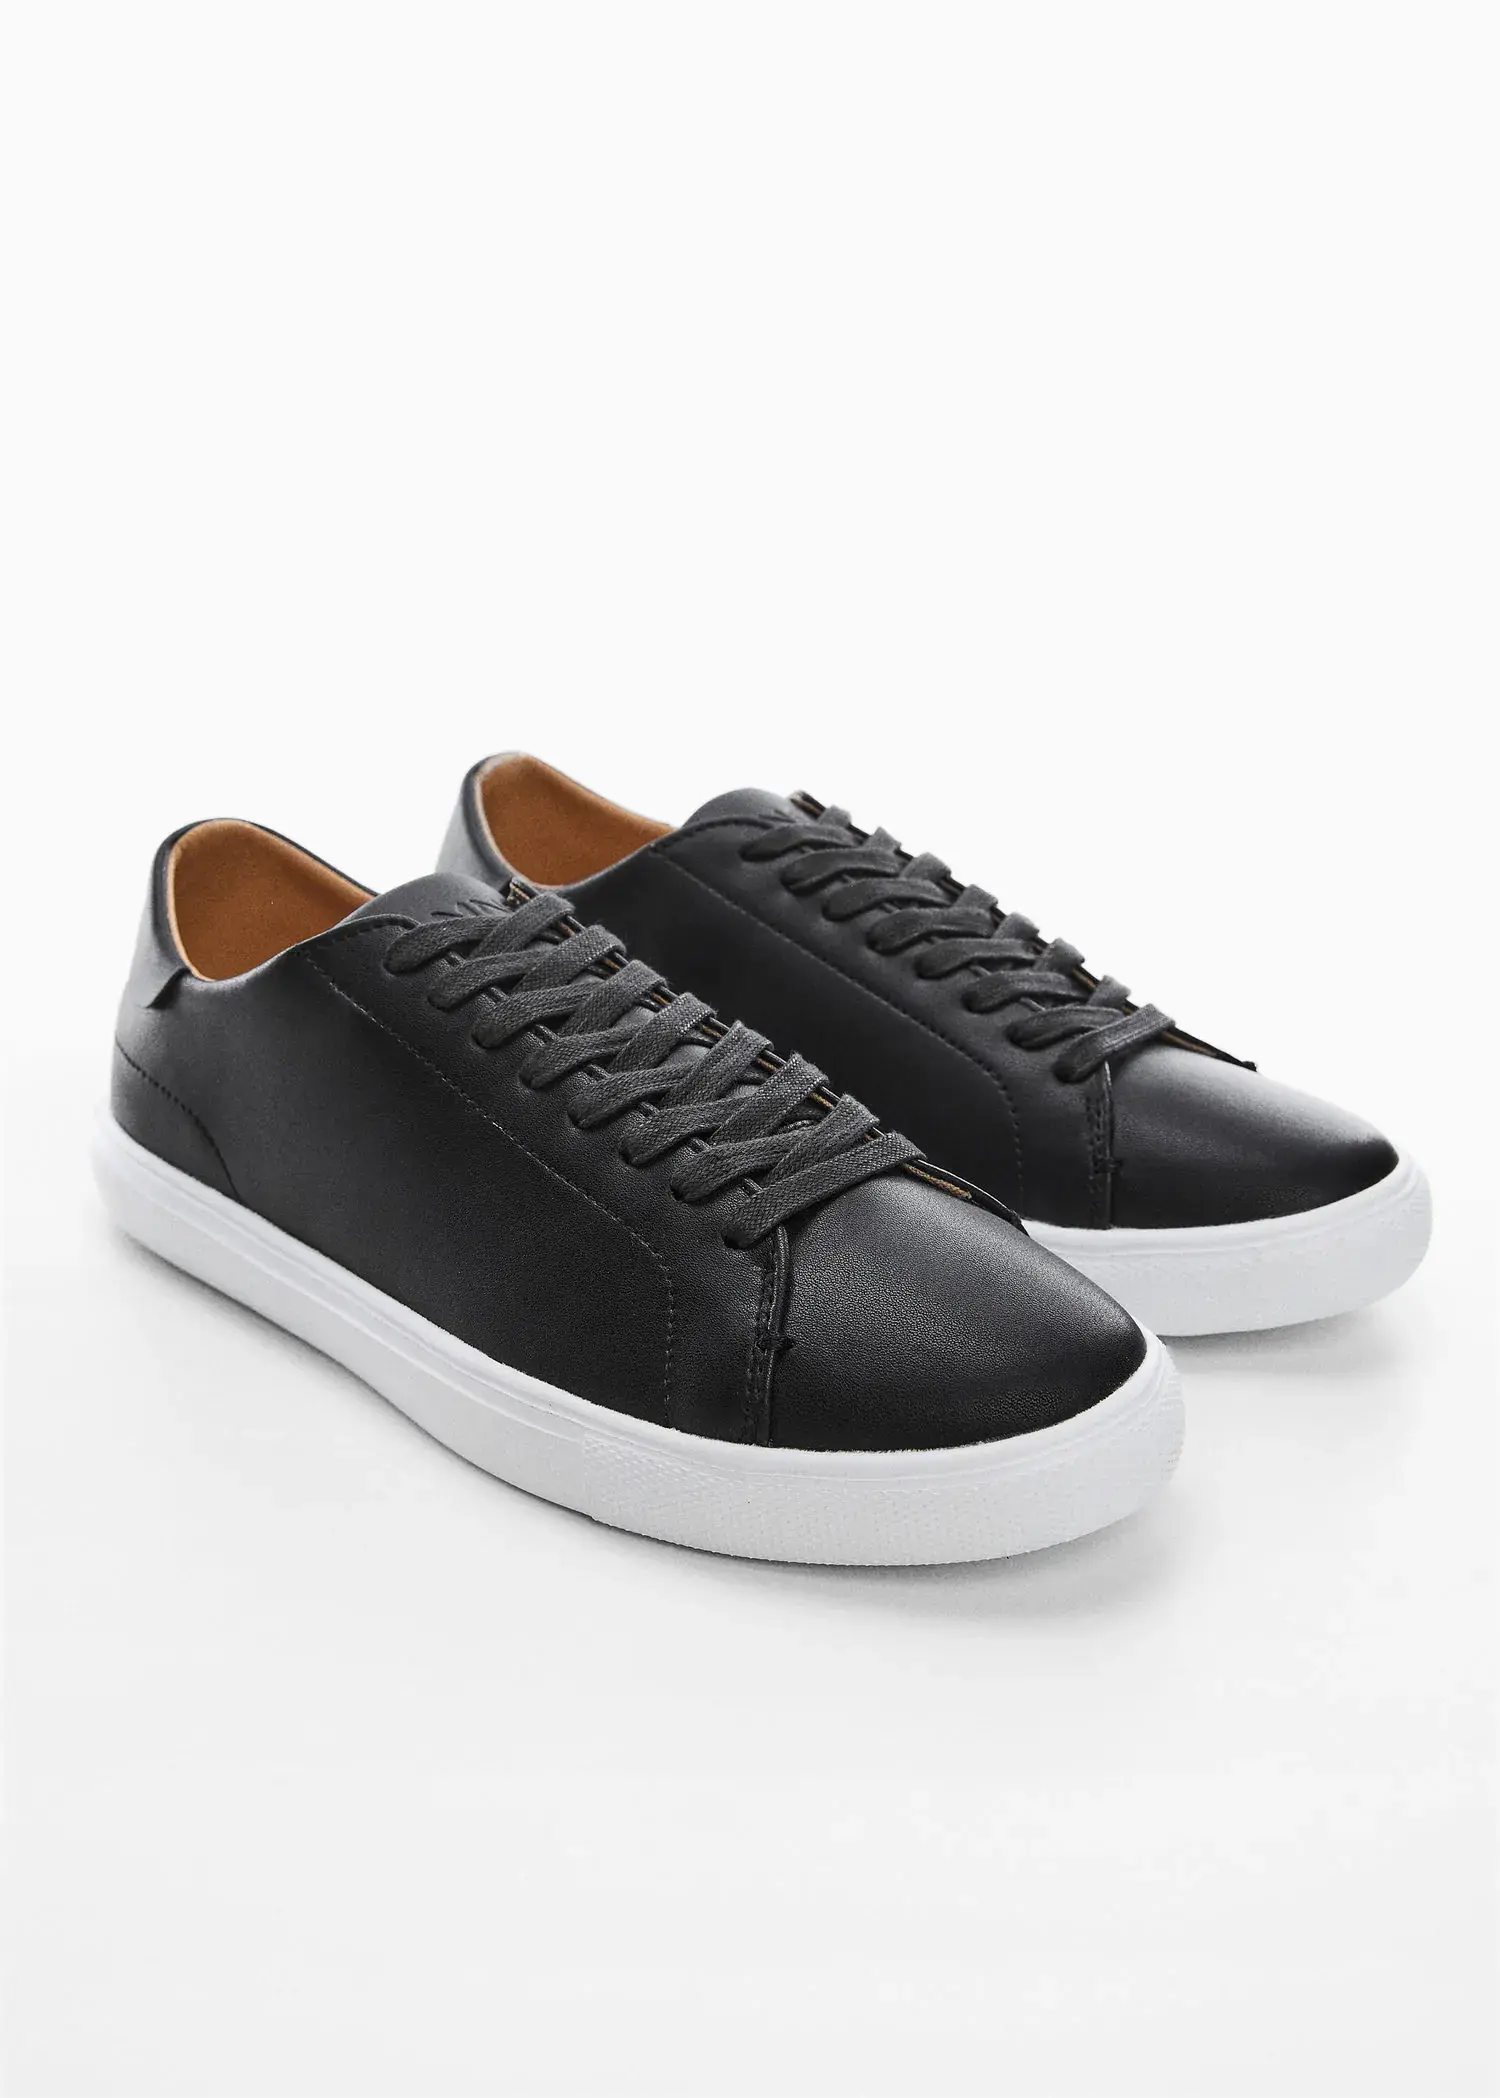 Mango Noncolored leather sneakers. a pair of black sneakers on a white surface. 